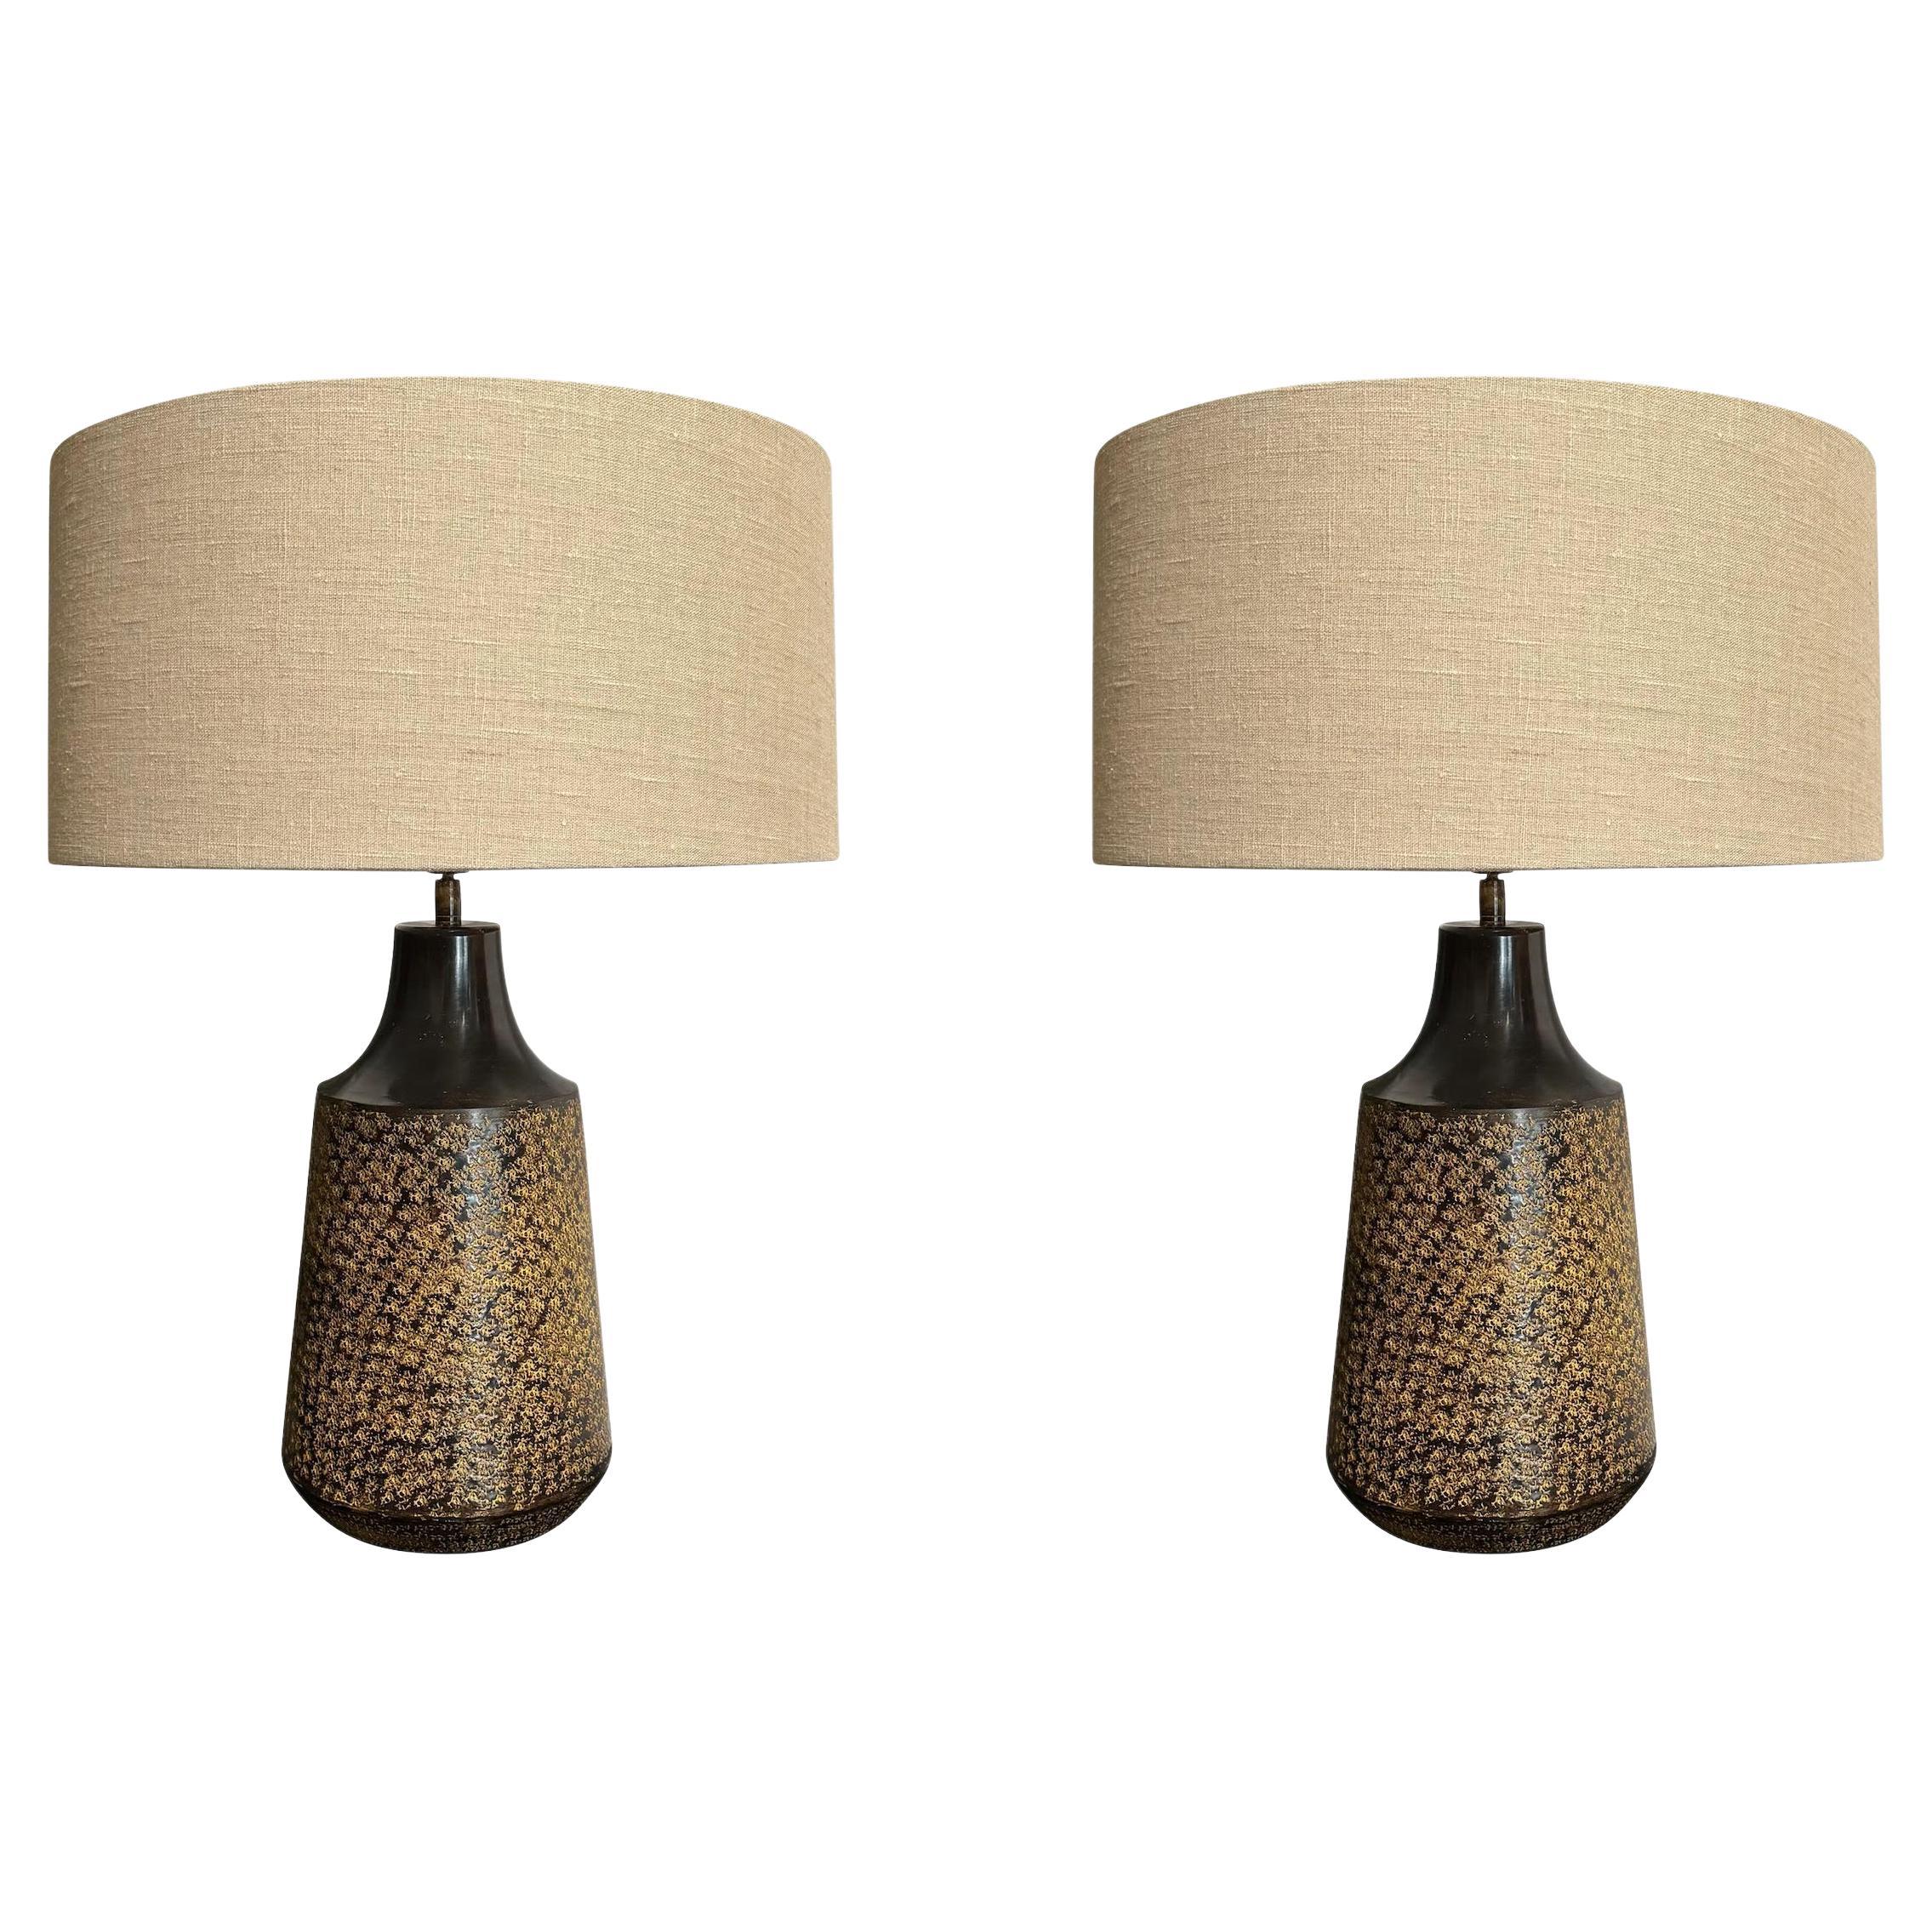 Brown Pair Textured Metal Lamps With Shades, China, Contemporary For Sale